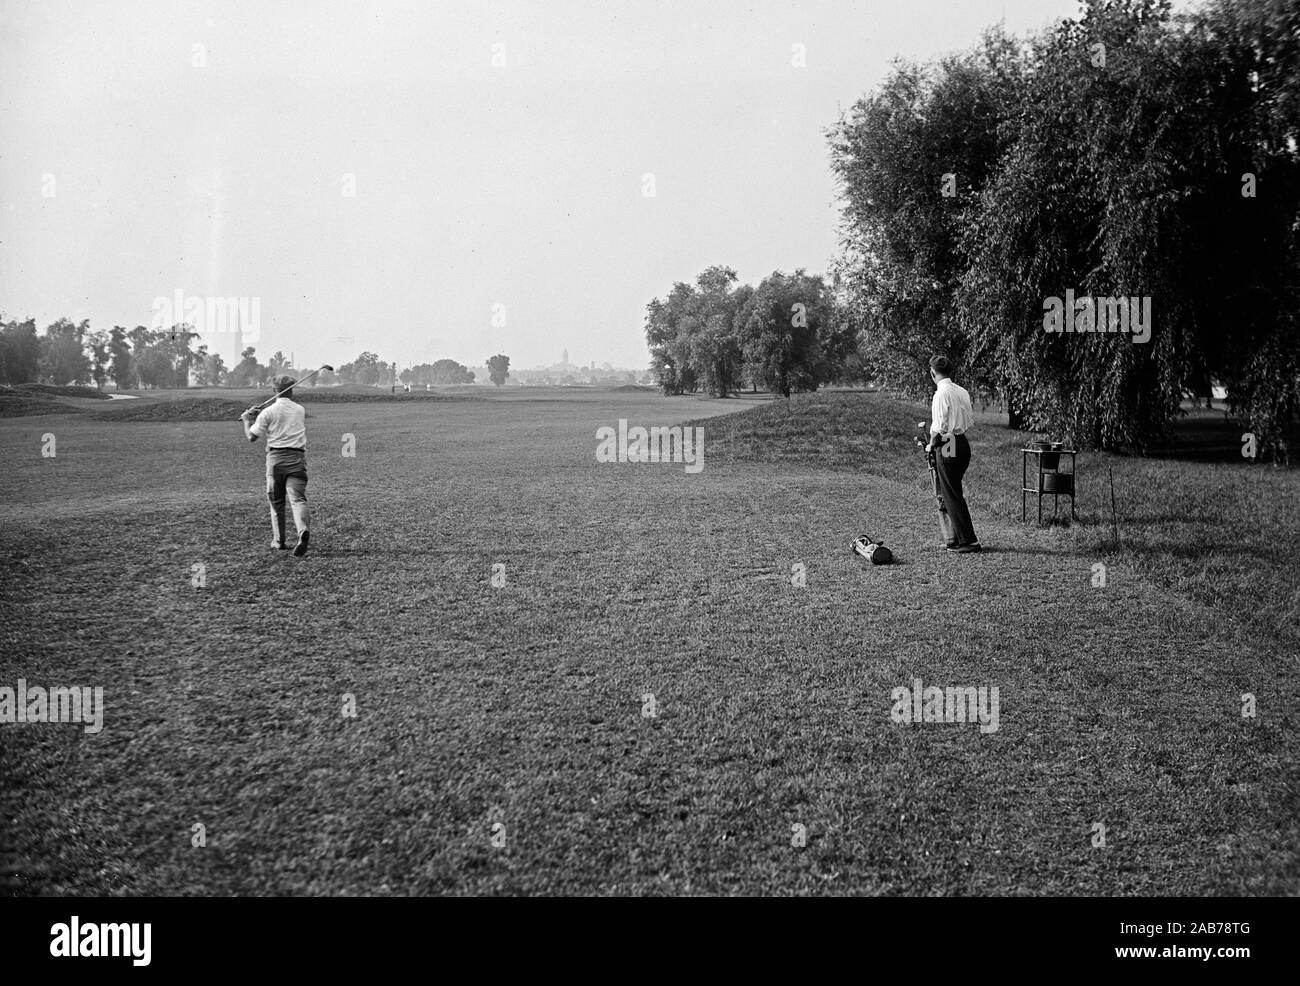 Vintage Golf Photo - A group of golfers on a golf course fairway ca. 1915-1923 Stock Photo